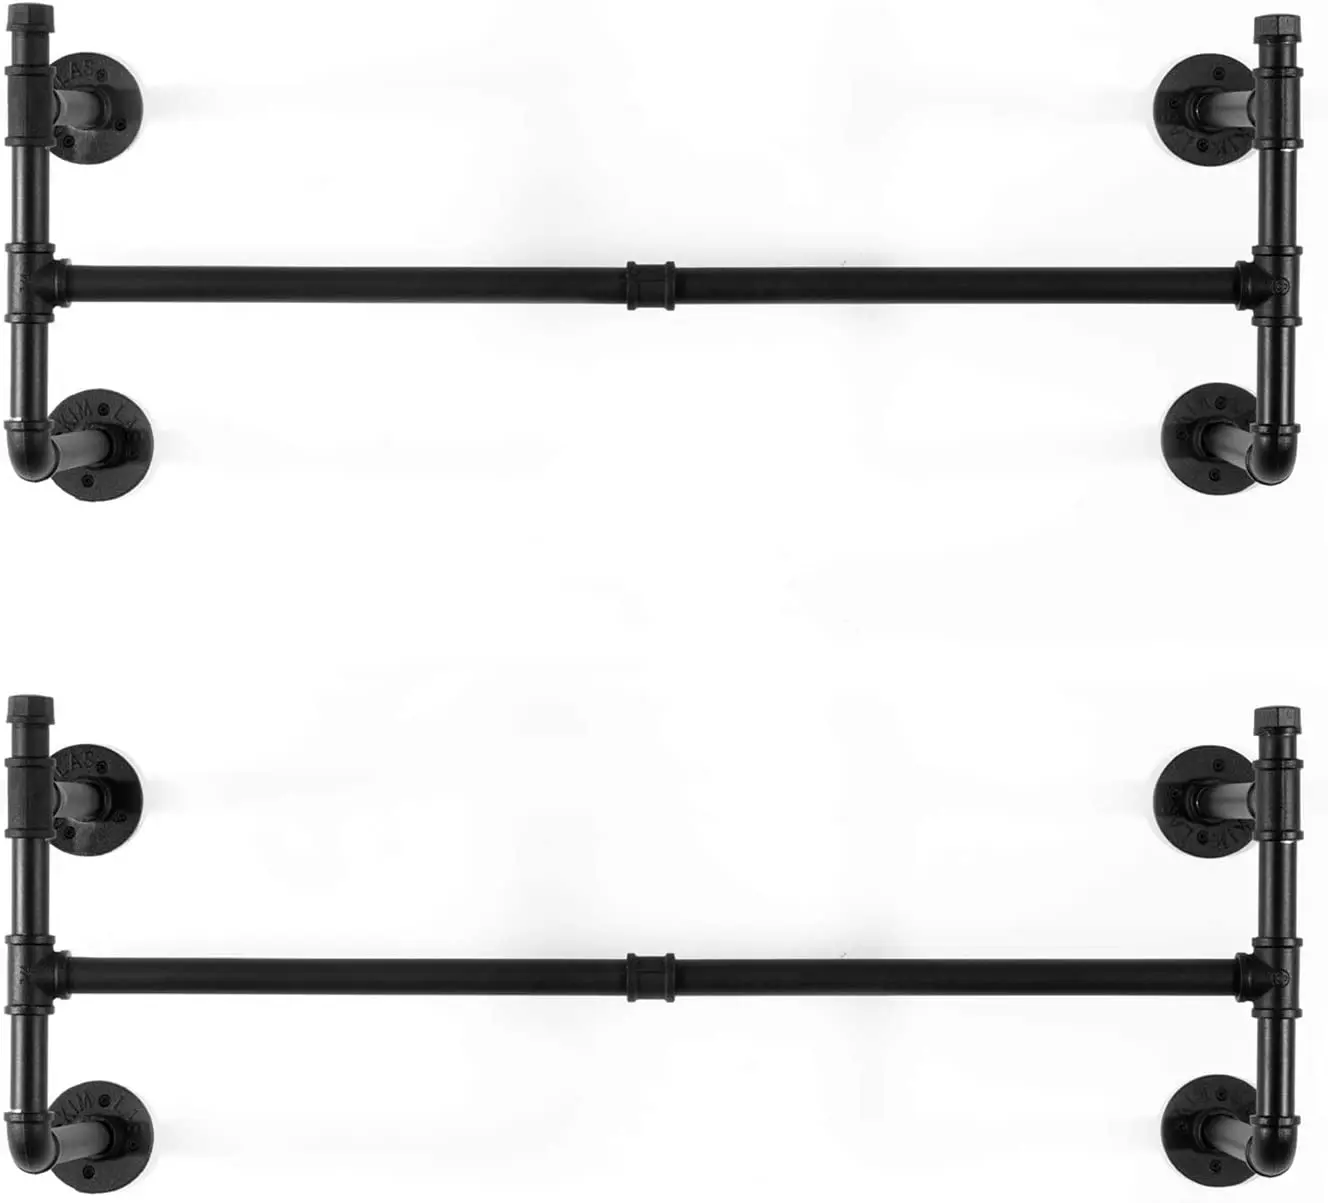 Wall Mounted Industrial Pipe Clothes Rack, Heavy Duty Black cast Iron Garment Rack Bar, Hanging Rod for Closet Storage